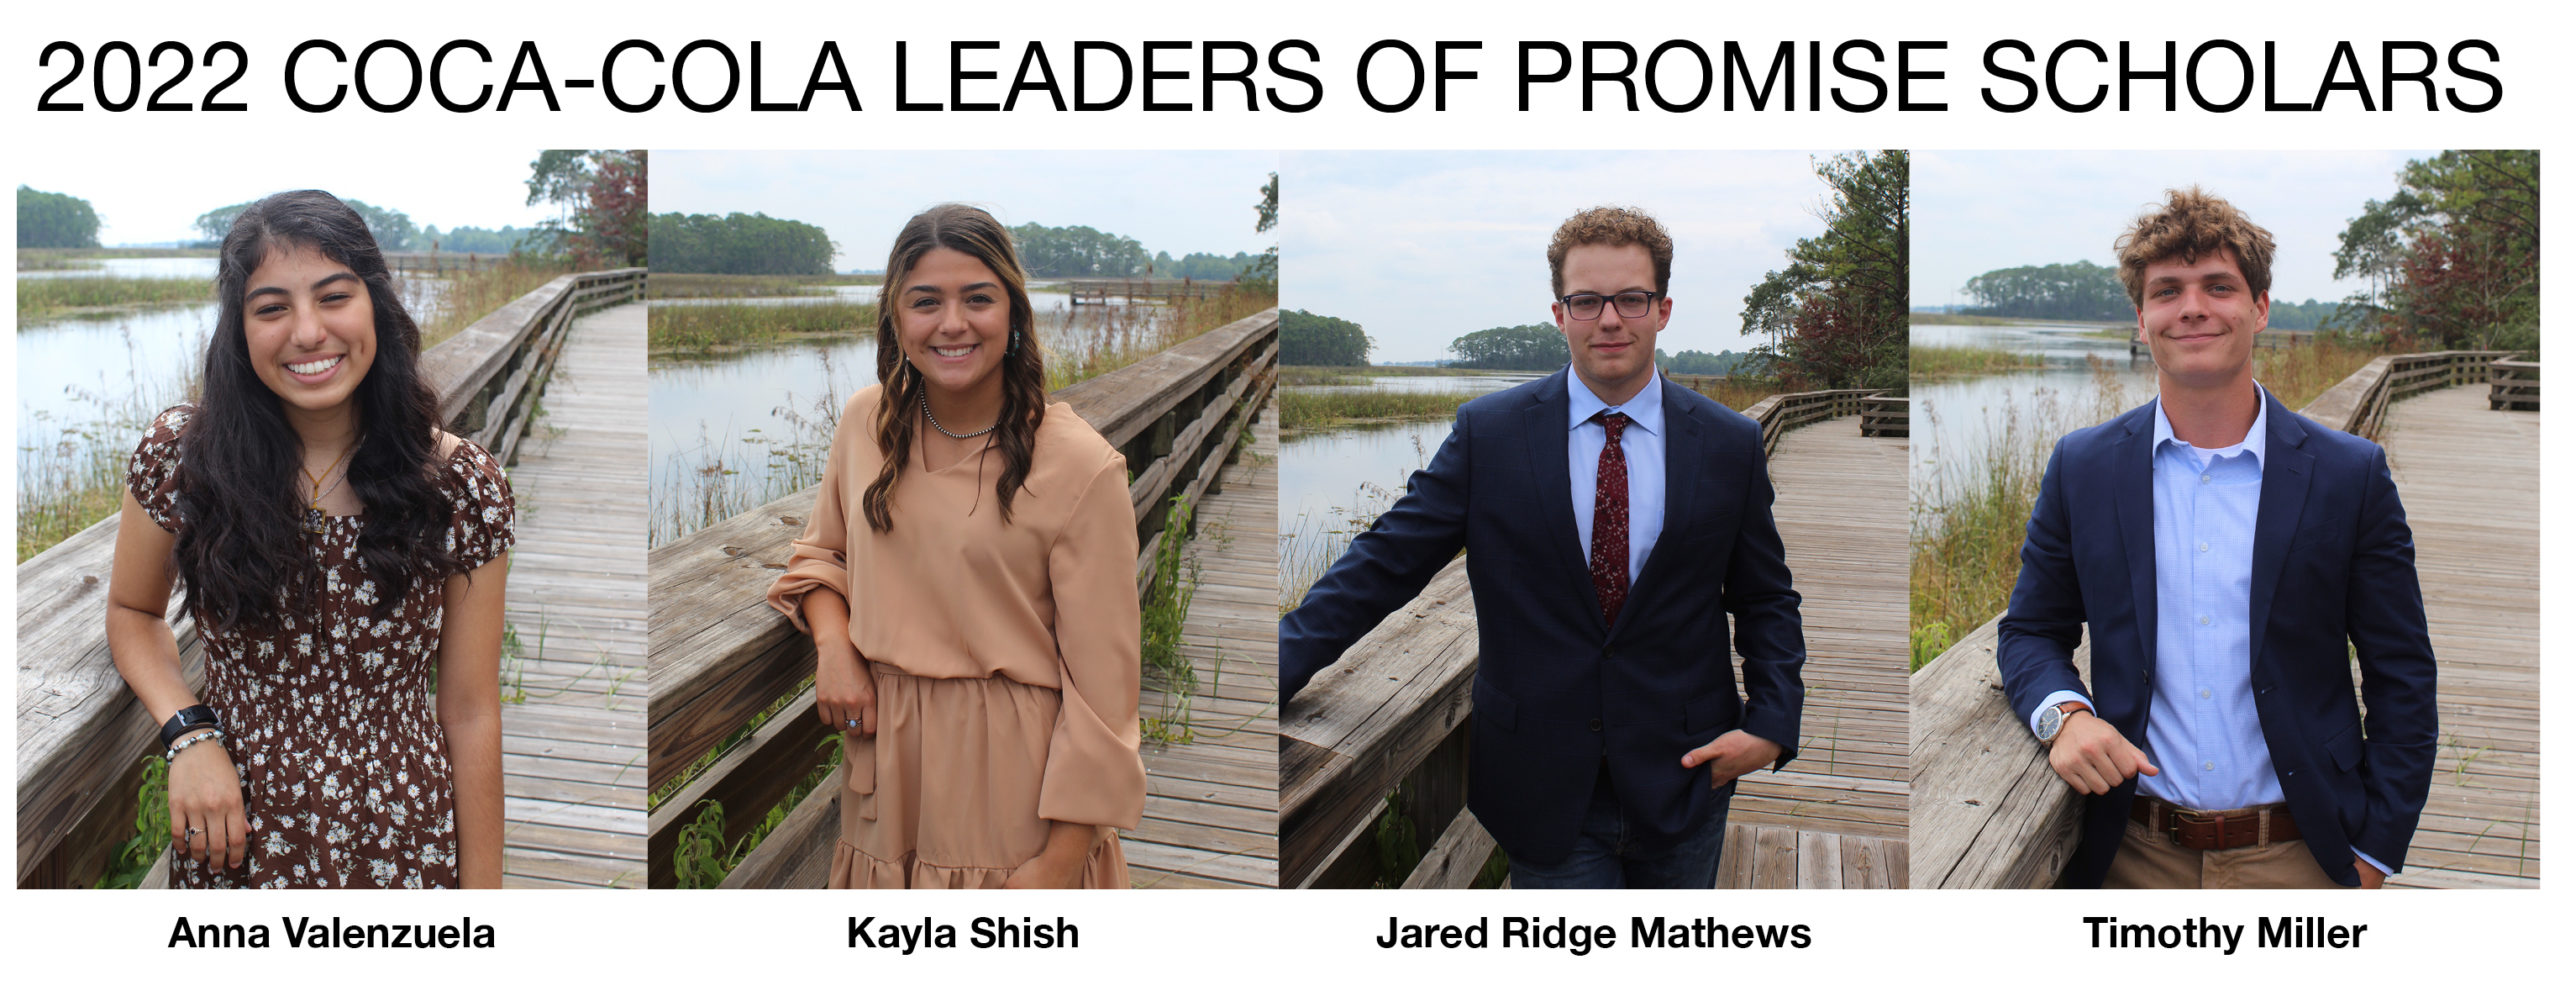 Four MGCCC students named Coca-Cola Leaders of Promise Scholars